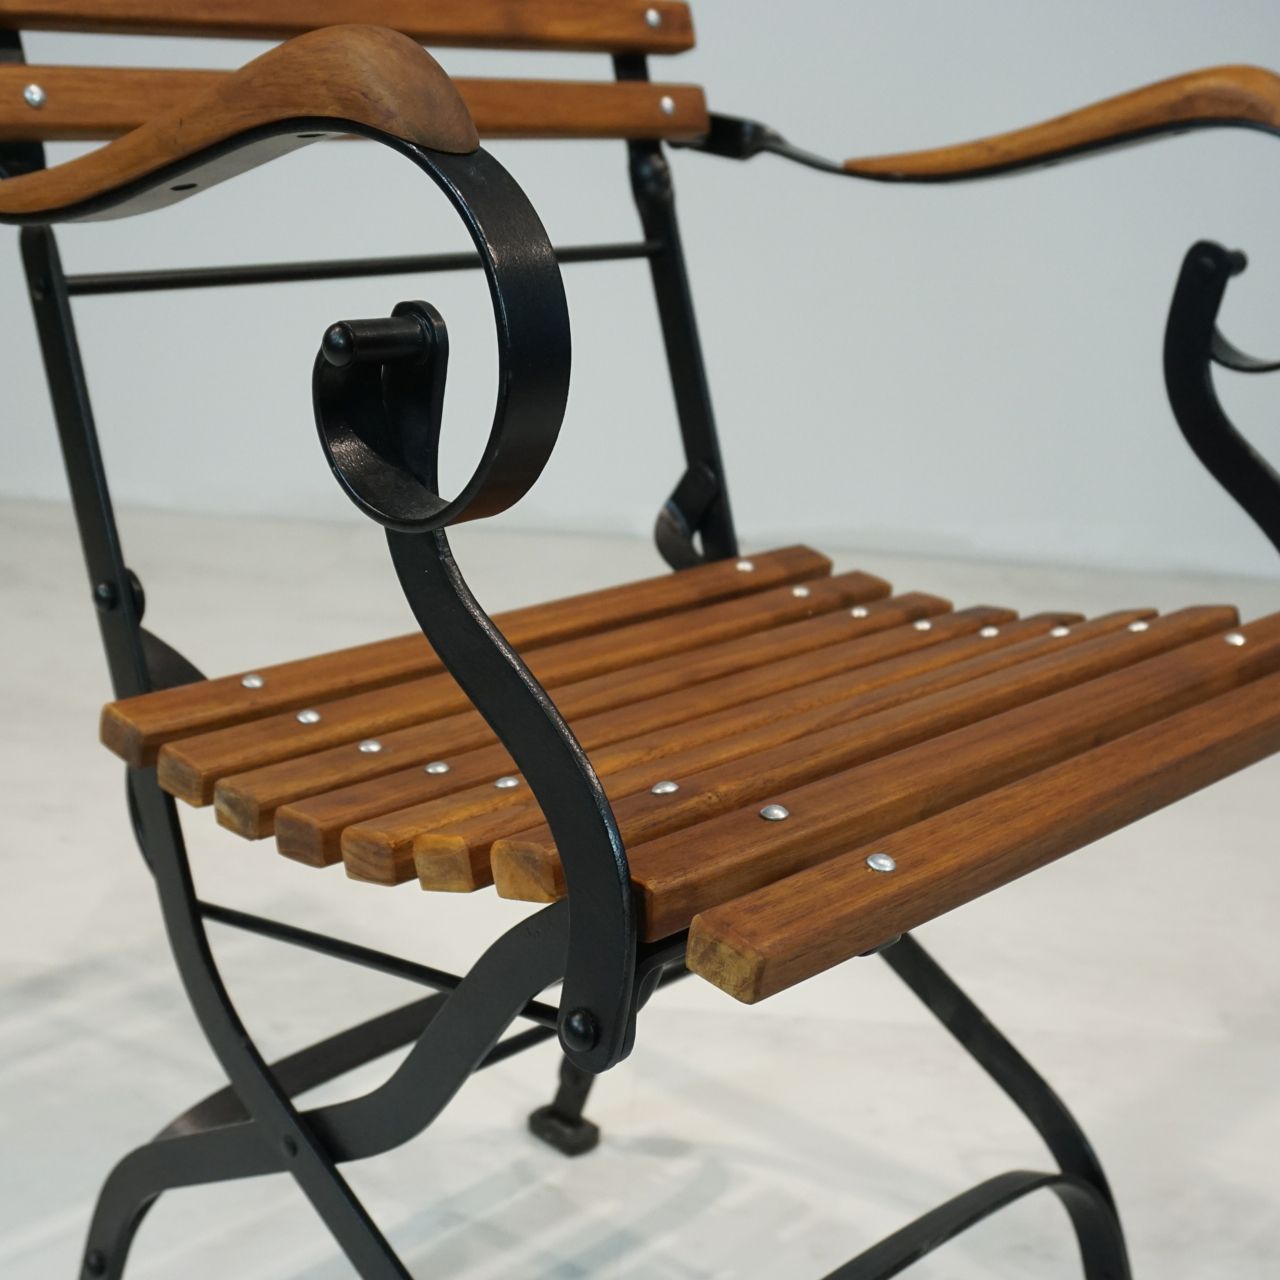 French Provincial Iron And Teak Folding Outdoor Arm Chair – Irongate Pertaining To Teak Outdoor Folding Armchairs (View 7 of 15)